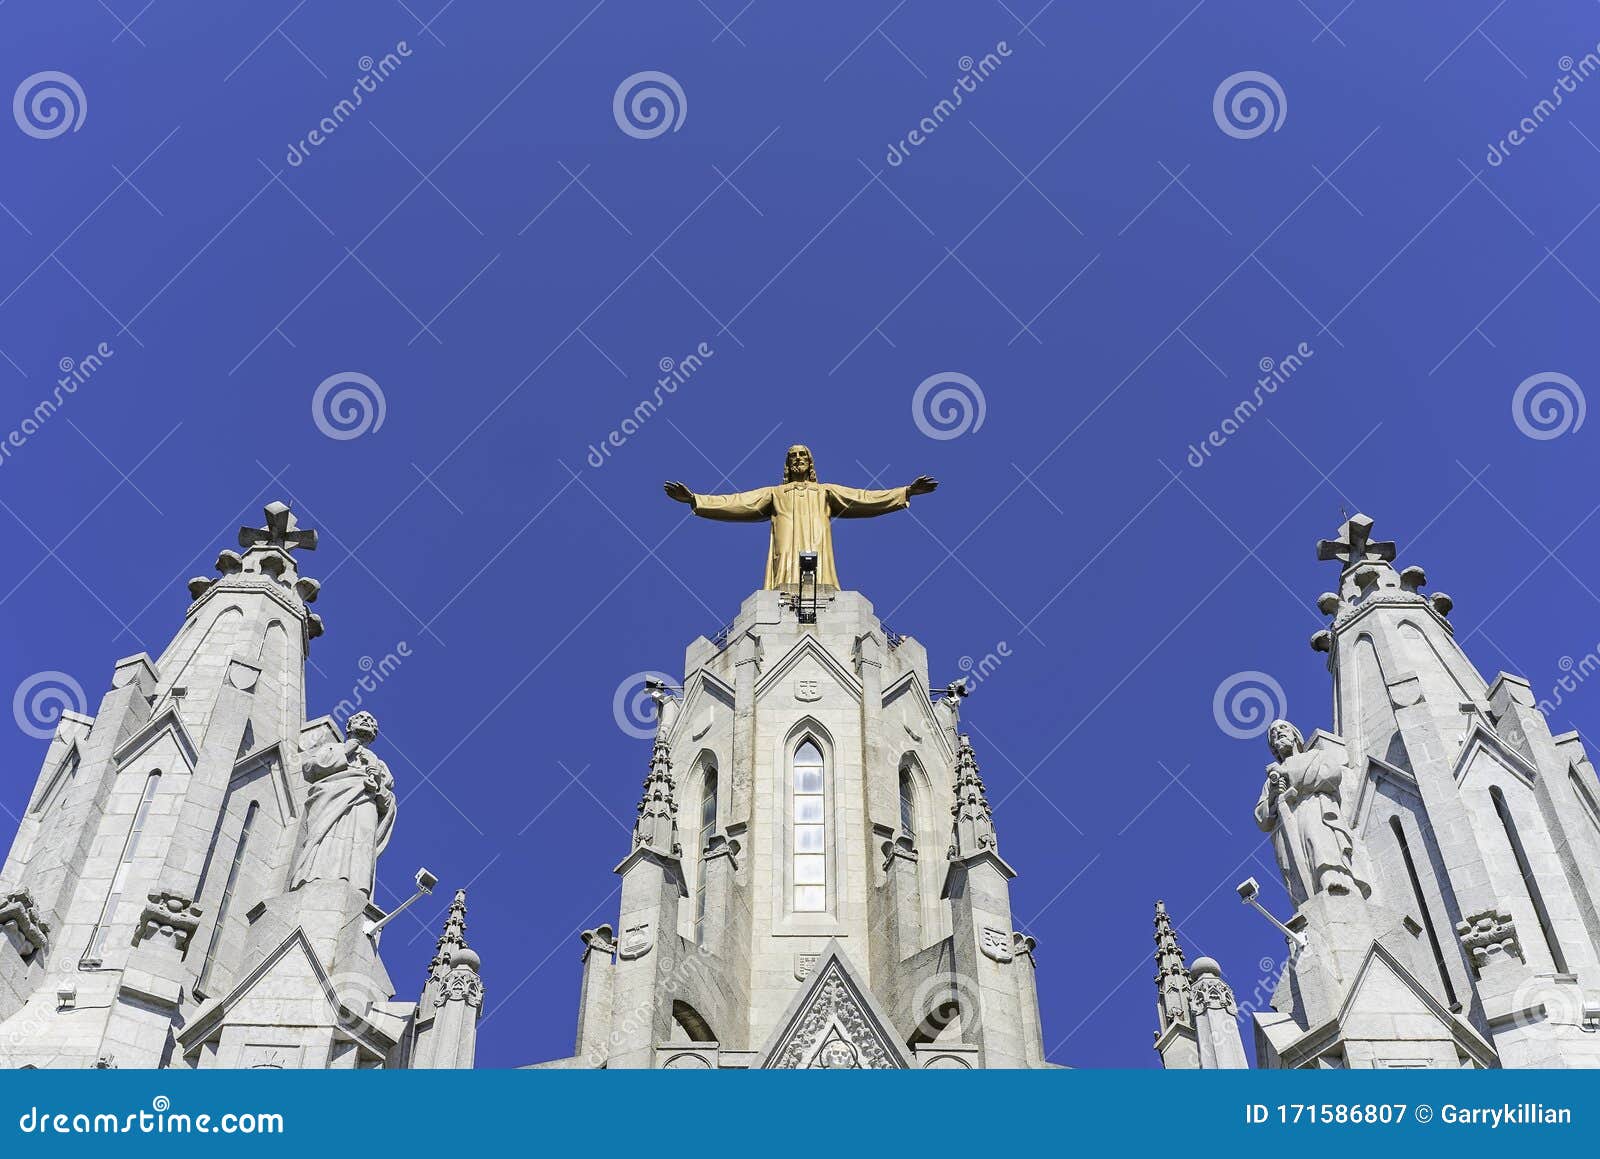 the expiatory temple of the sacred heart in barcelona, spain. with a classic blue sky.